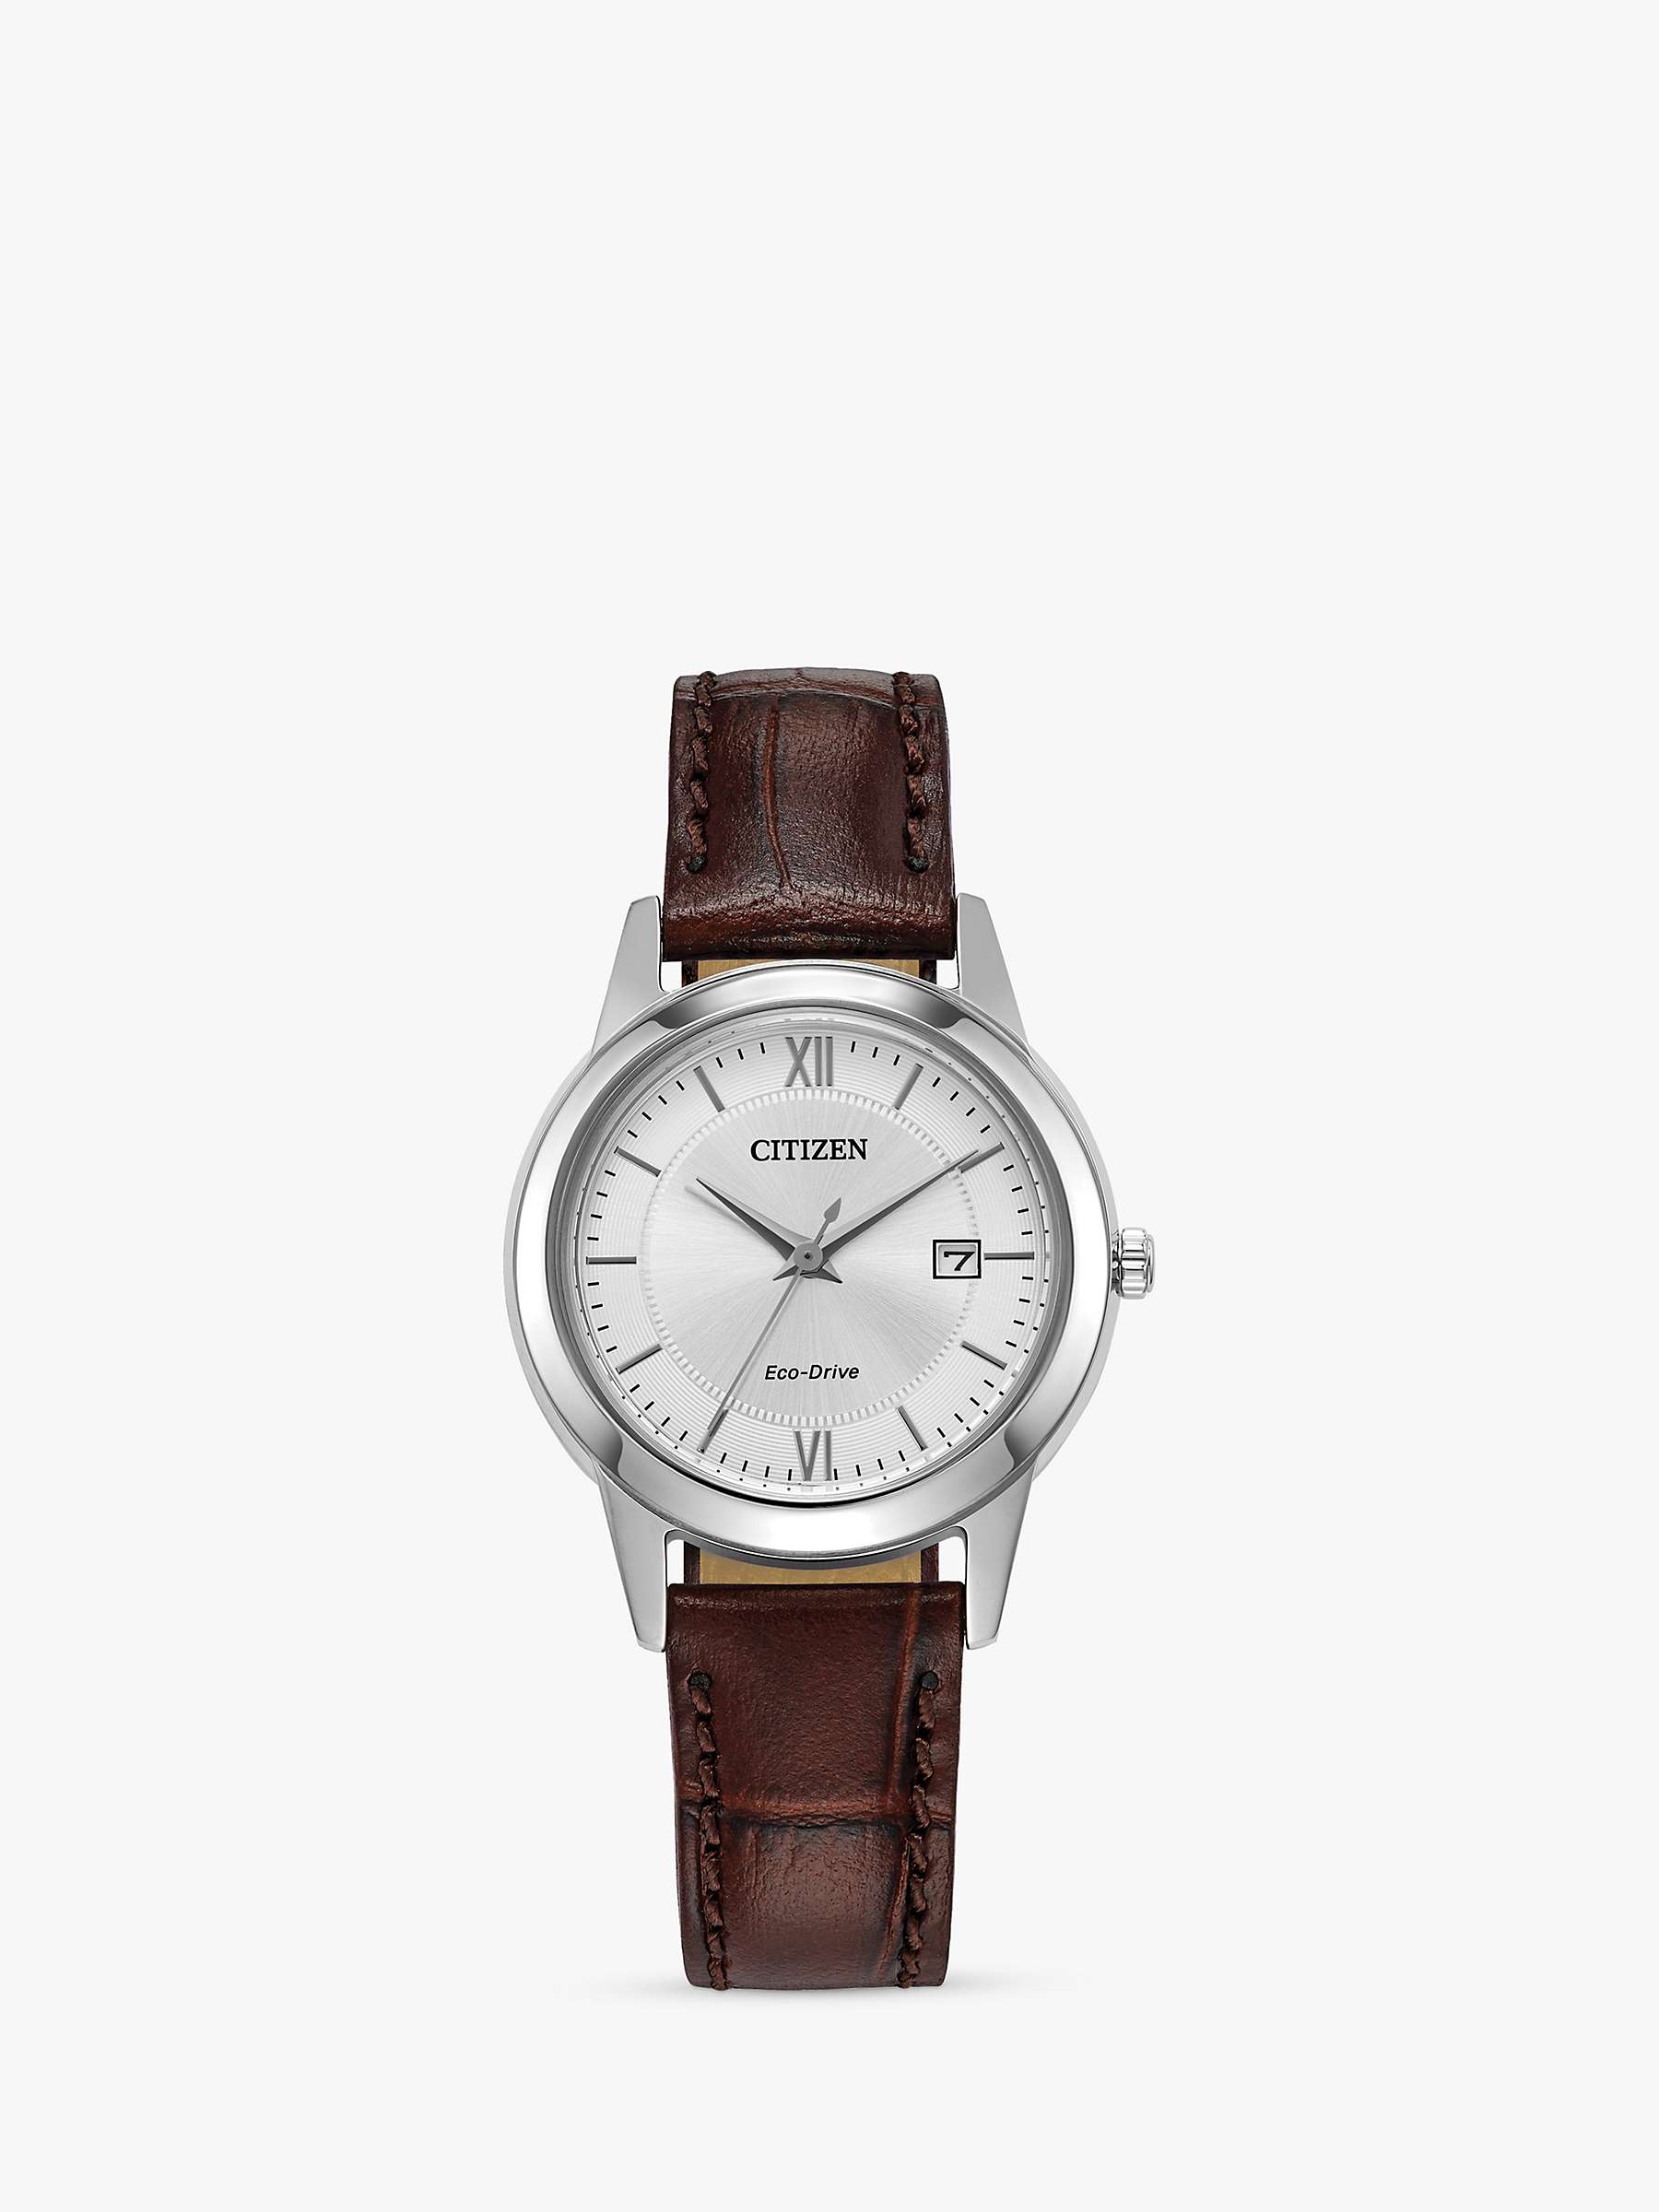 Buy Citizen Women's Eco-Drive Date Leather Strap Watch Online at johnlewis.com